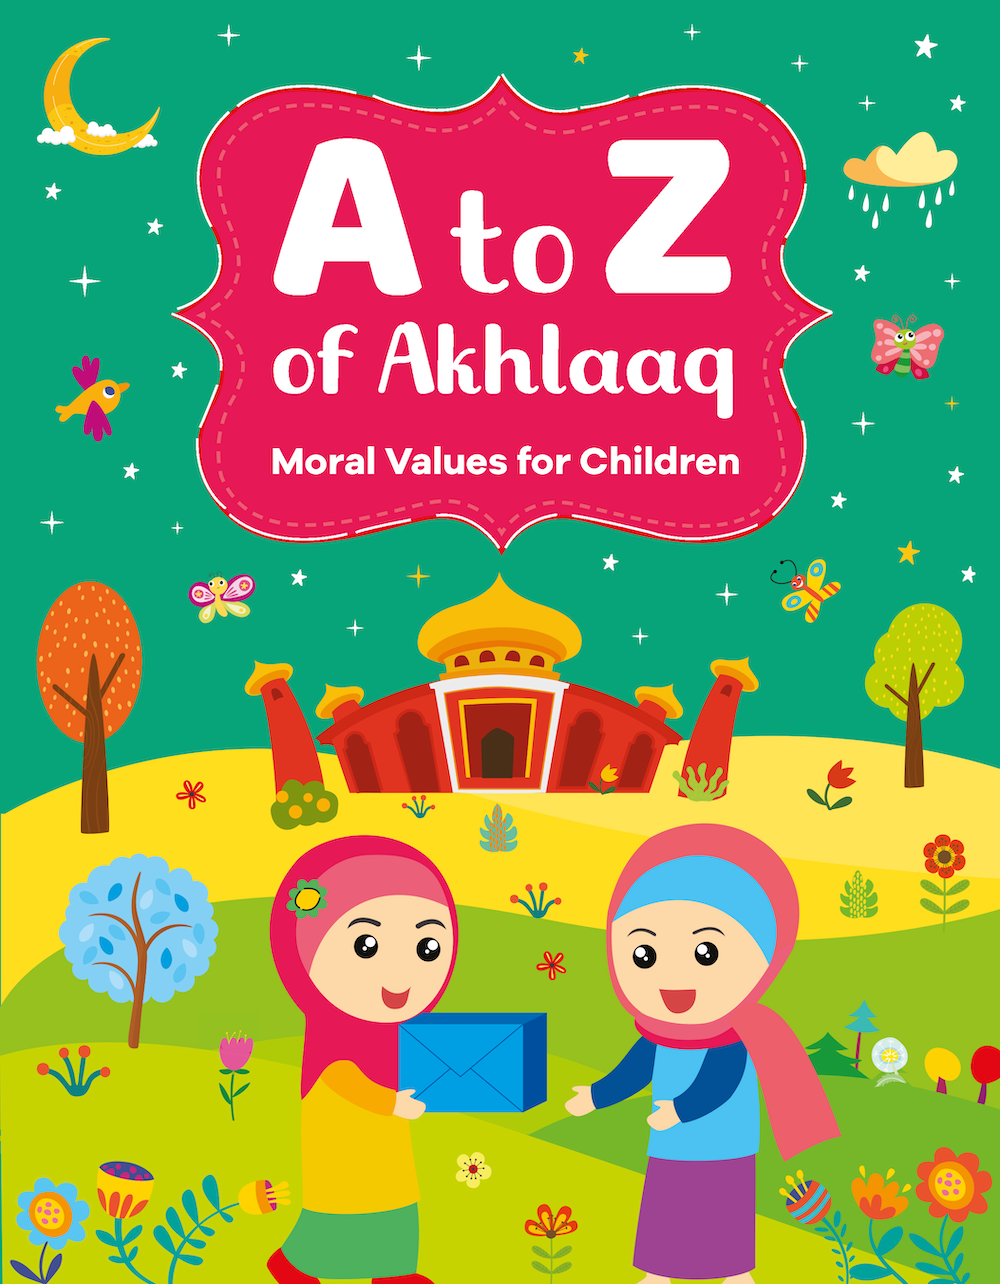 A to Z of Akhlaaq